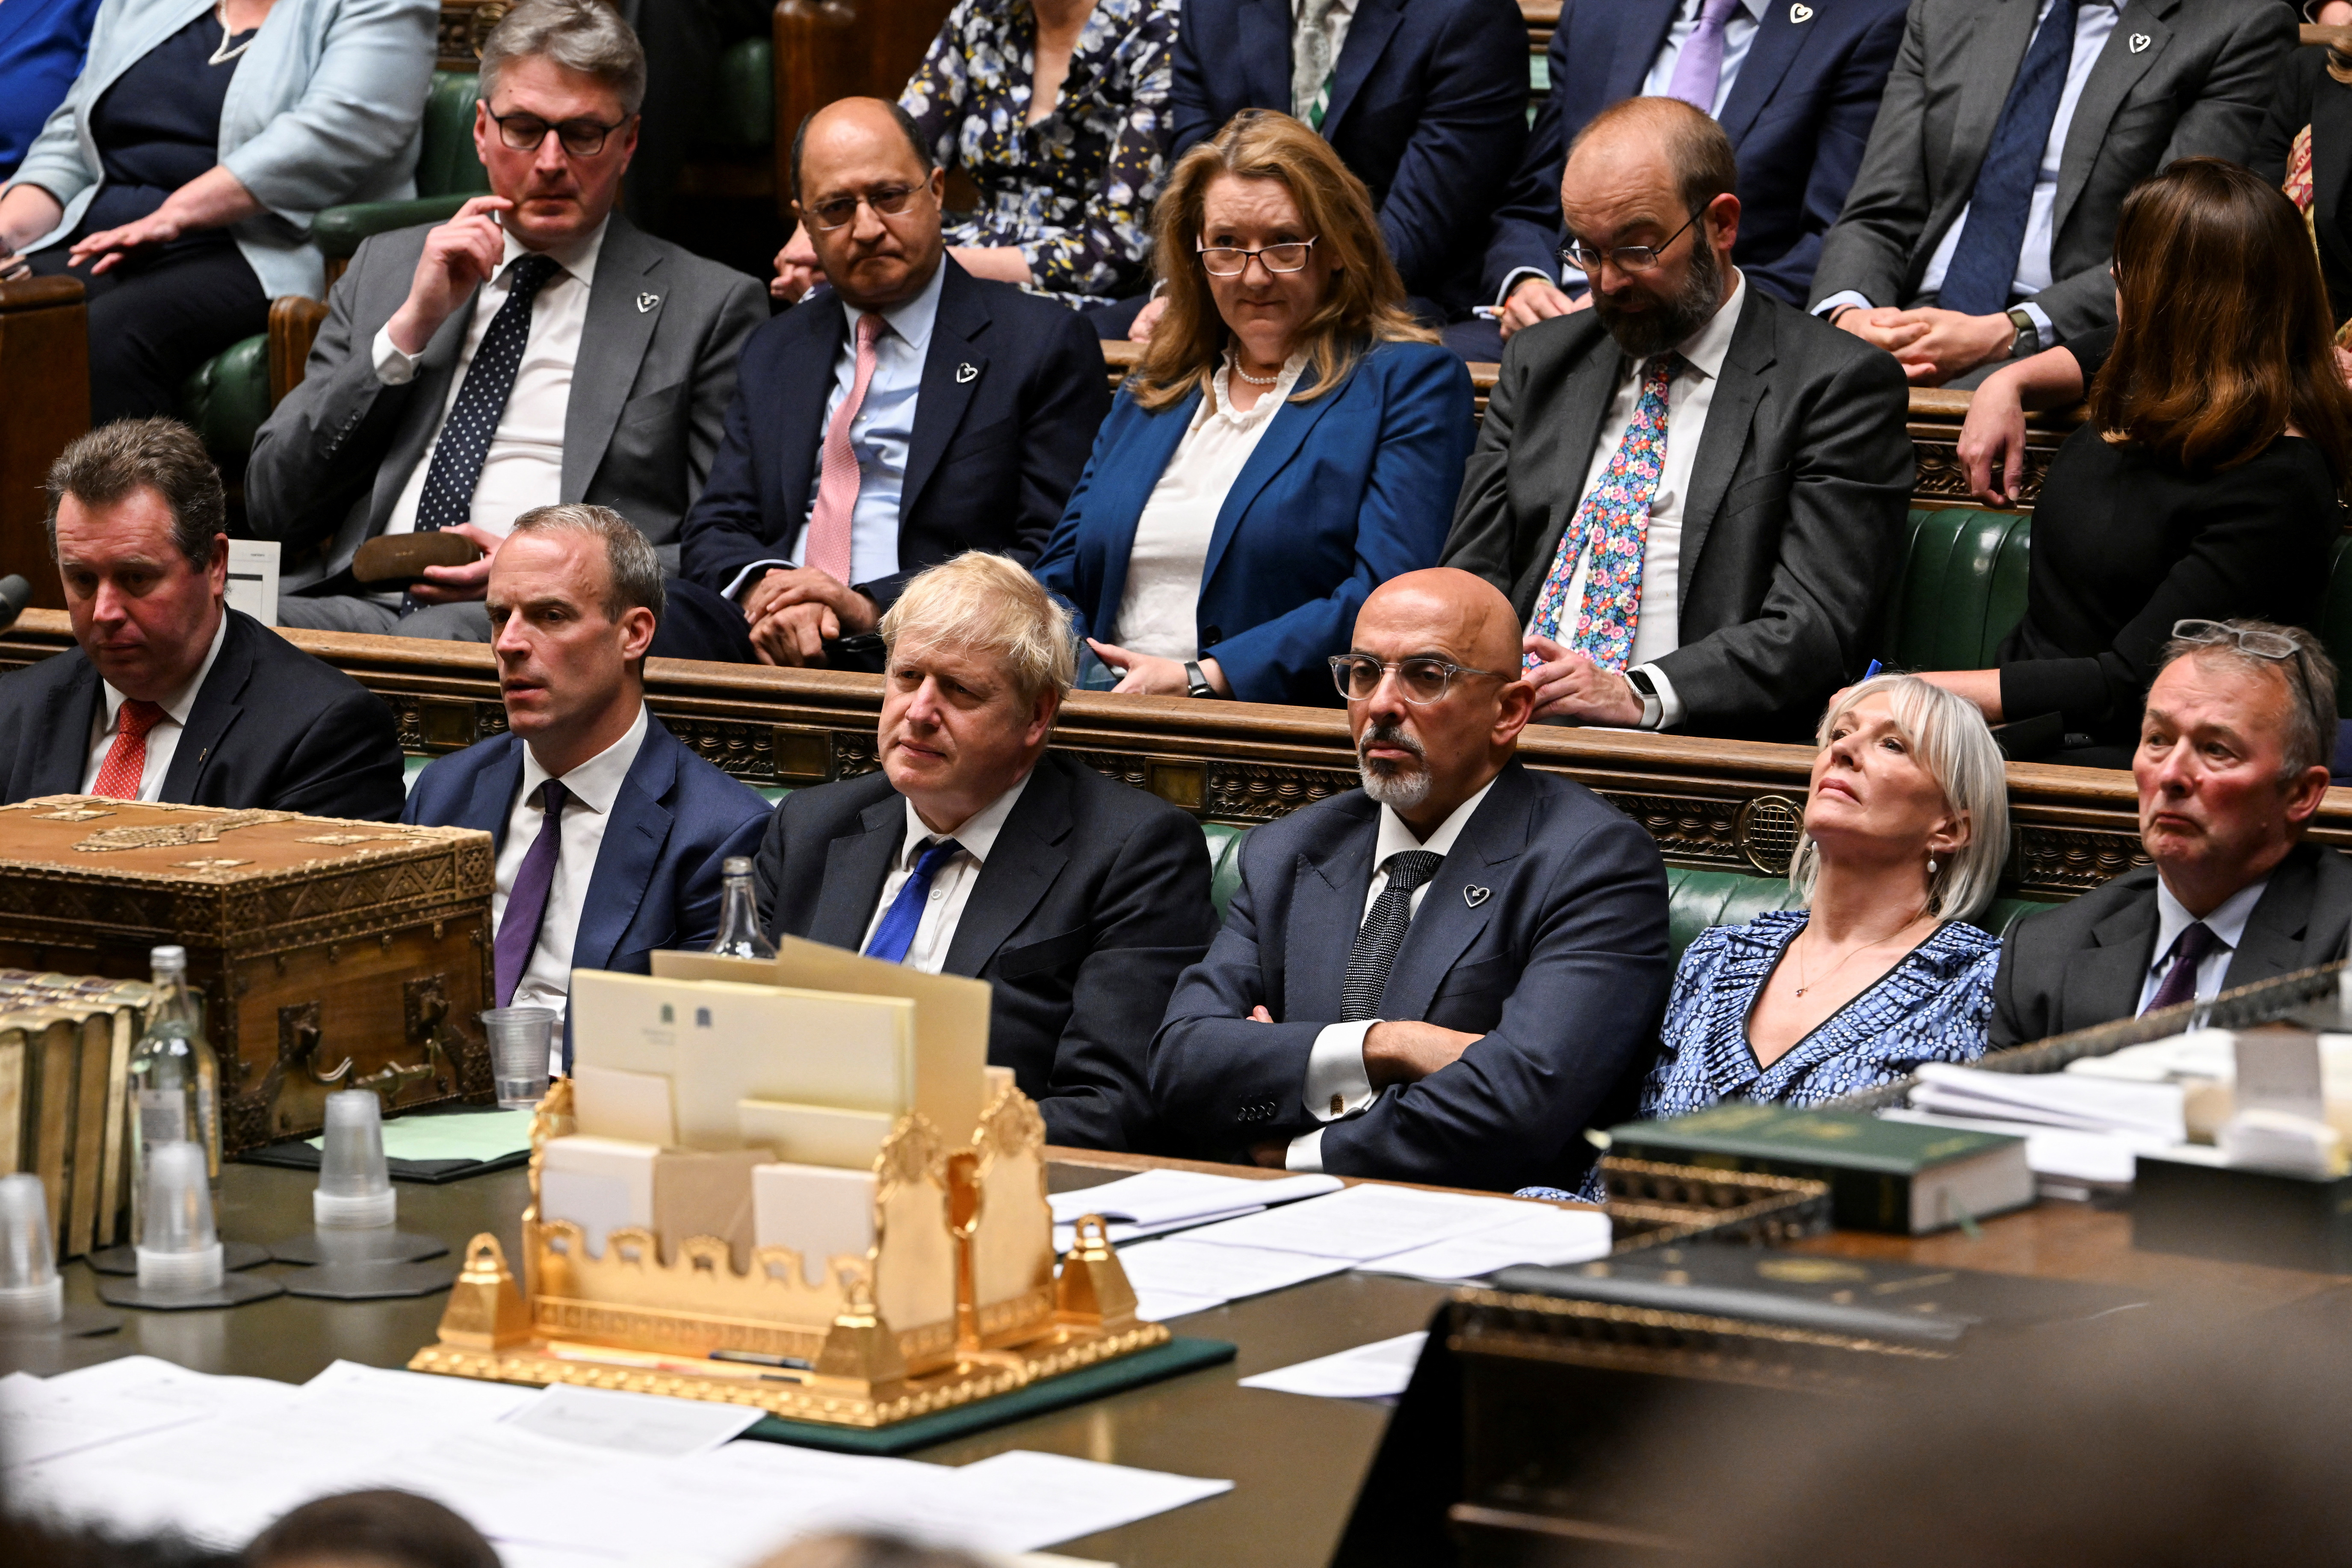 Prime Minister's Questions at the House of Commons in London